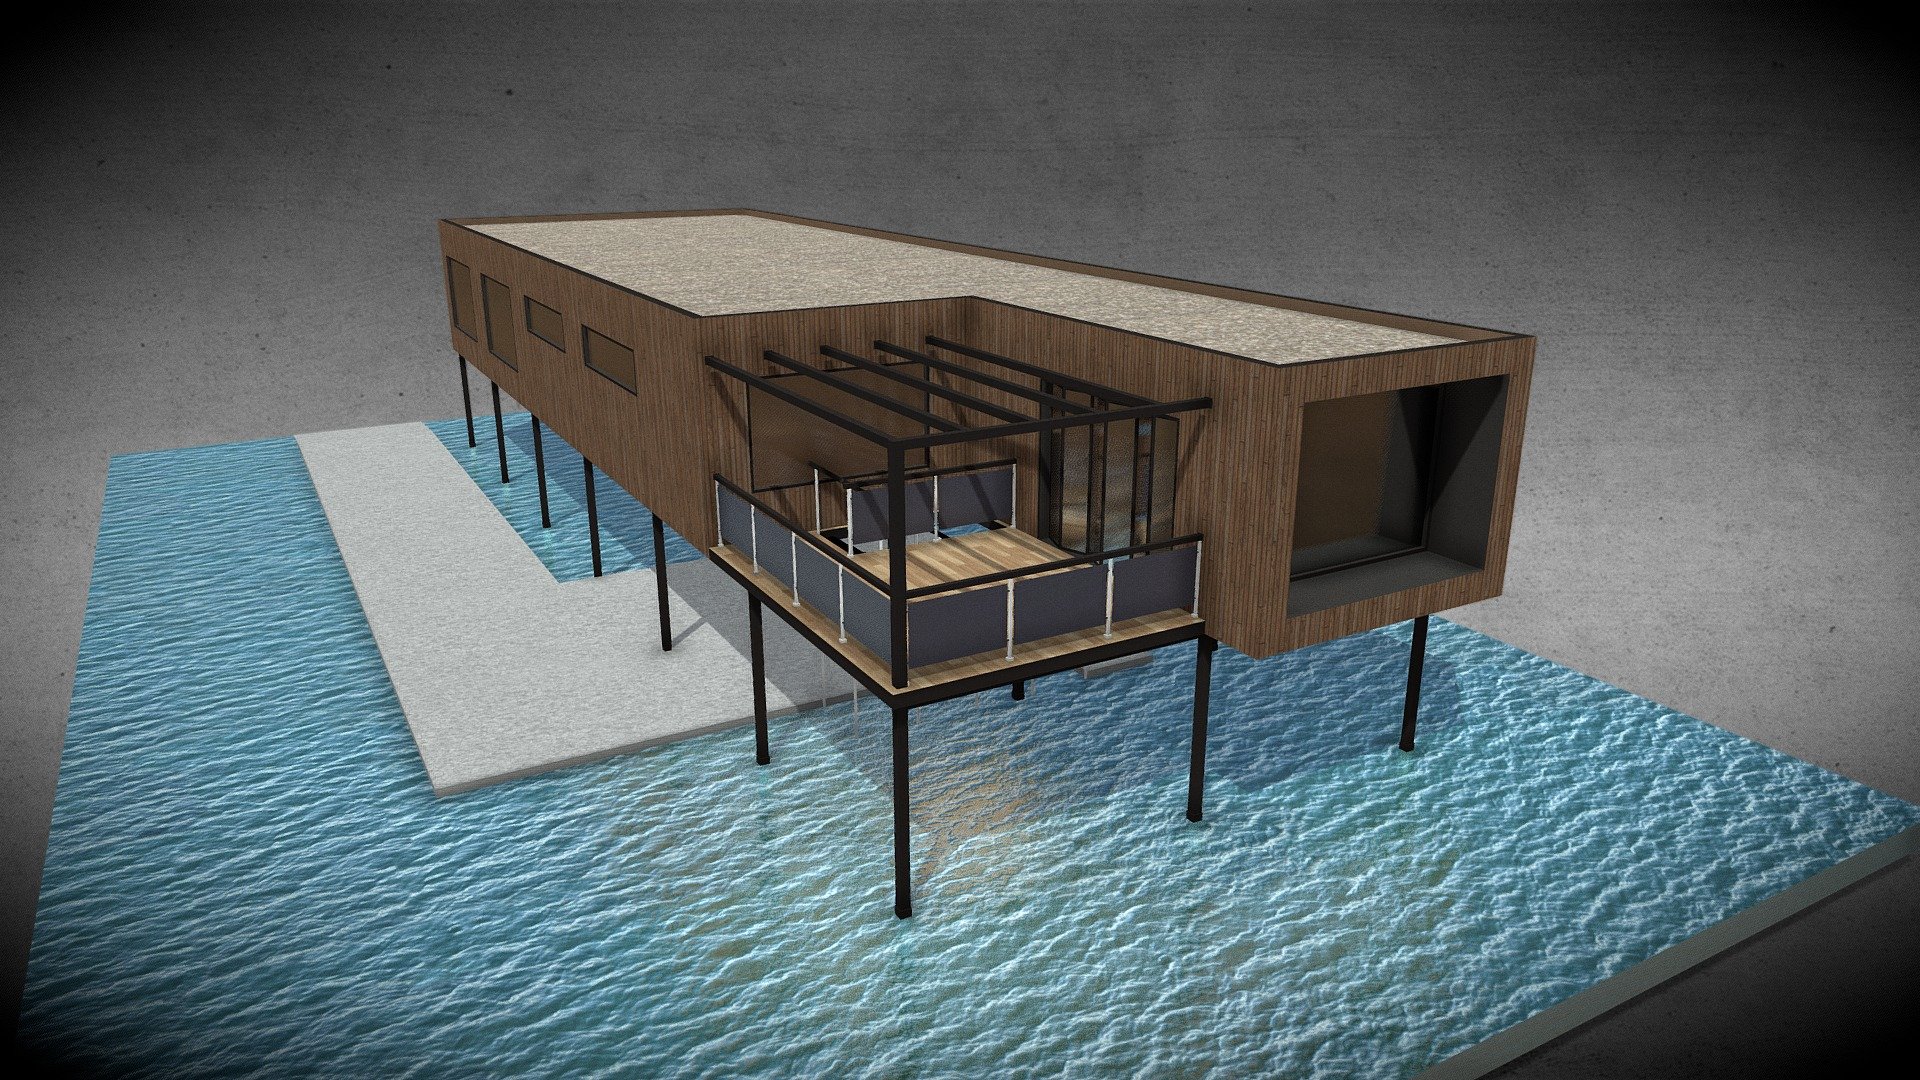 Stilt house

Inspired by https://www.swanbuild.com.au/building-plans/cube-3/

and https://sketchfab.com/3d-models/modular-house-cube-3-by-swanbuild-australia-fc4d35cfe8ee435993e0353dbecae7e0

Created to be integrated in the game &ldquo;CitiesSkylines